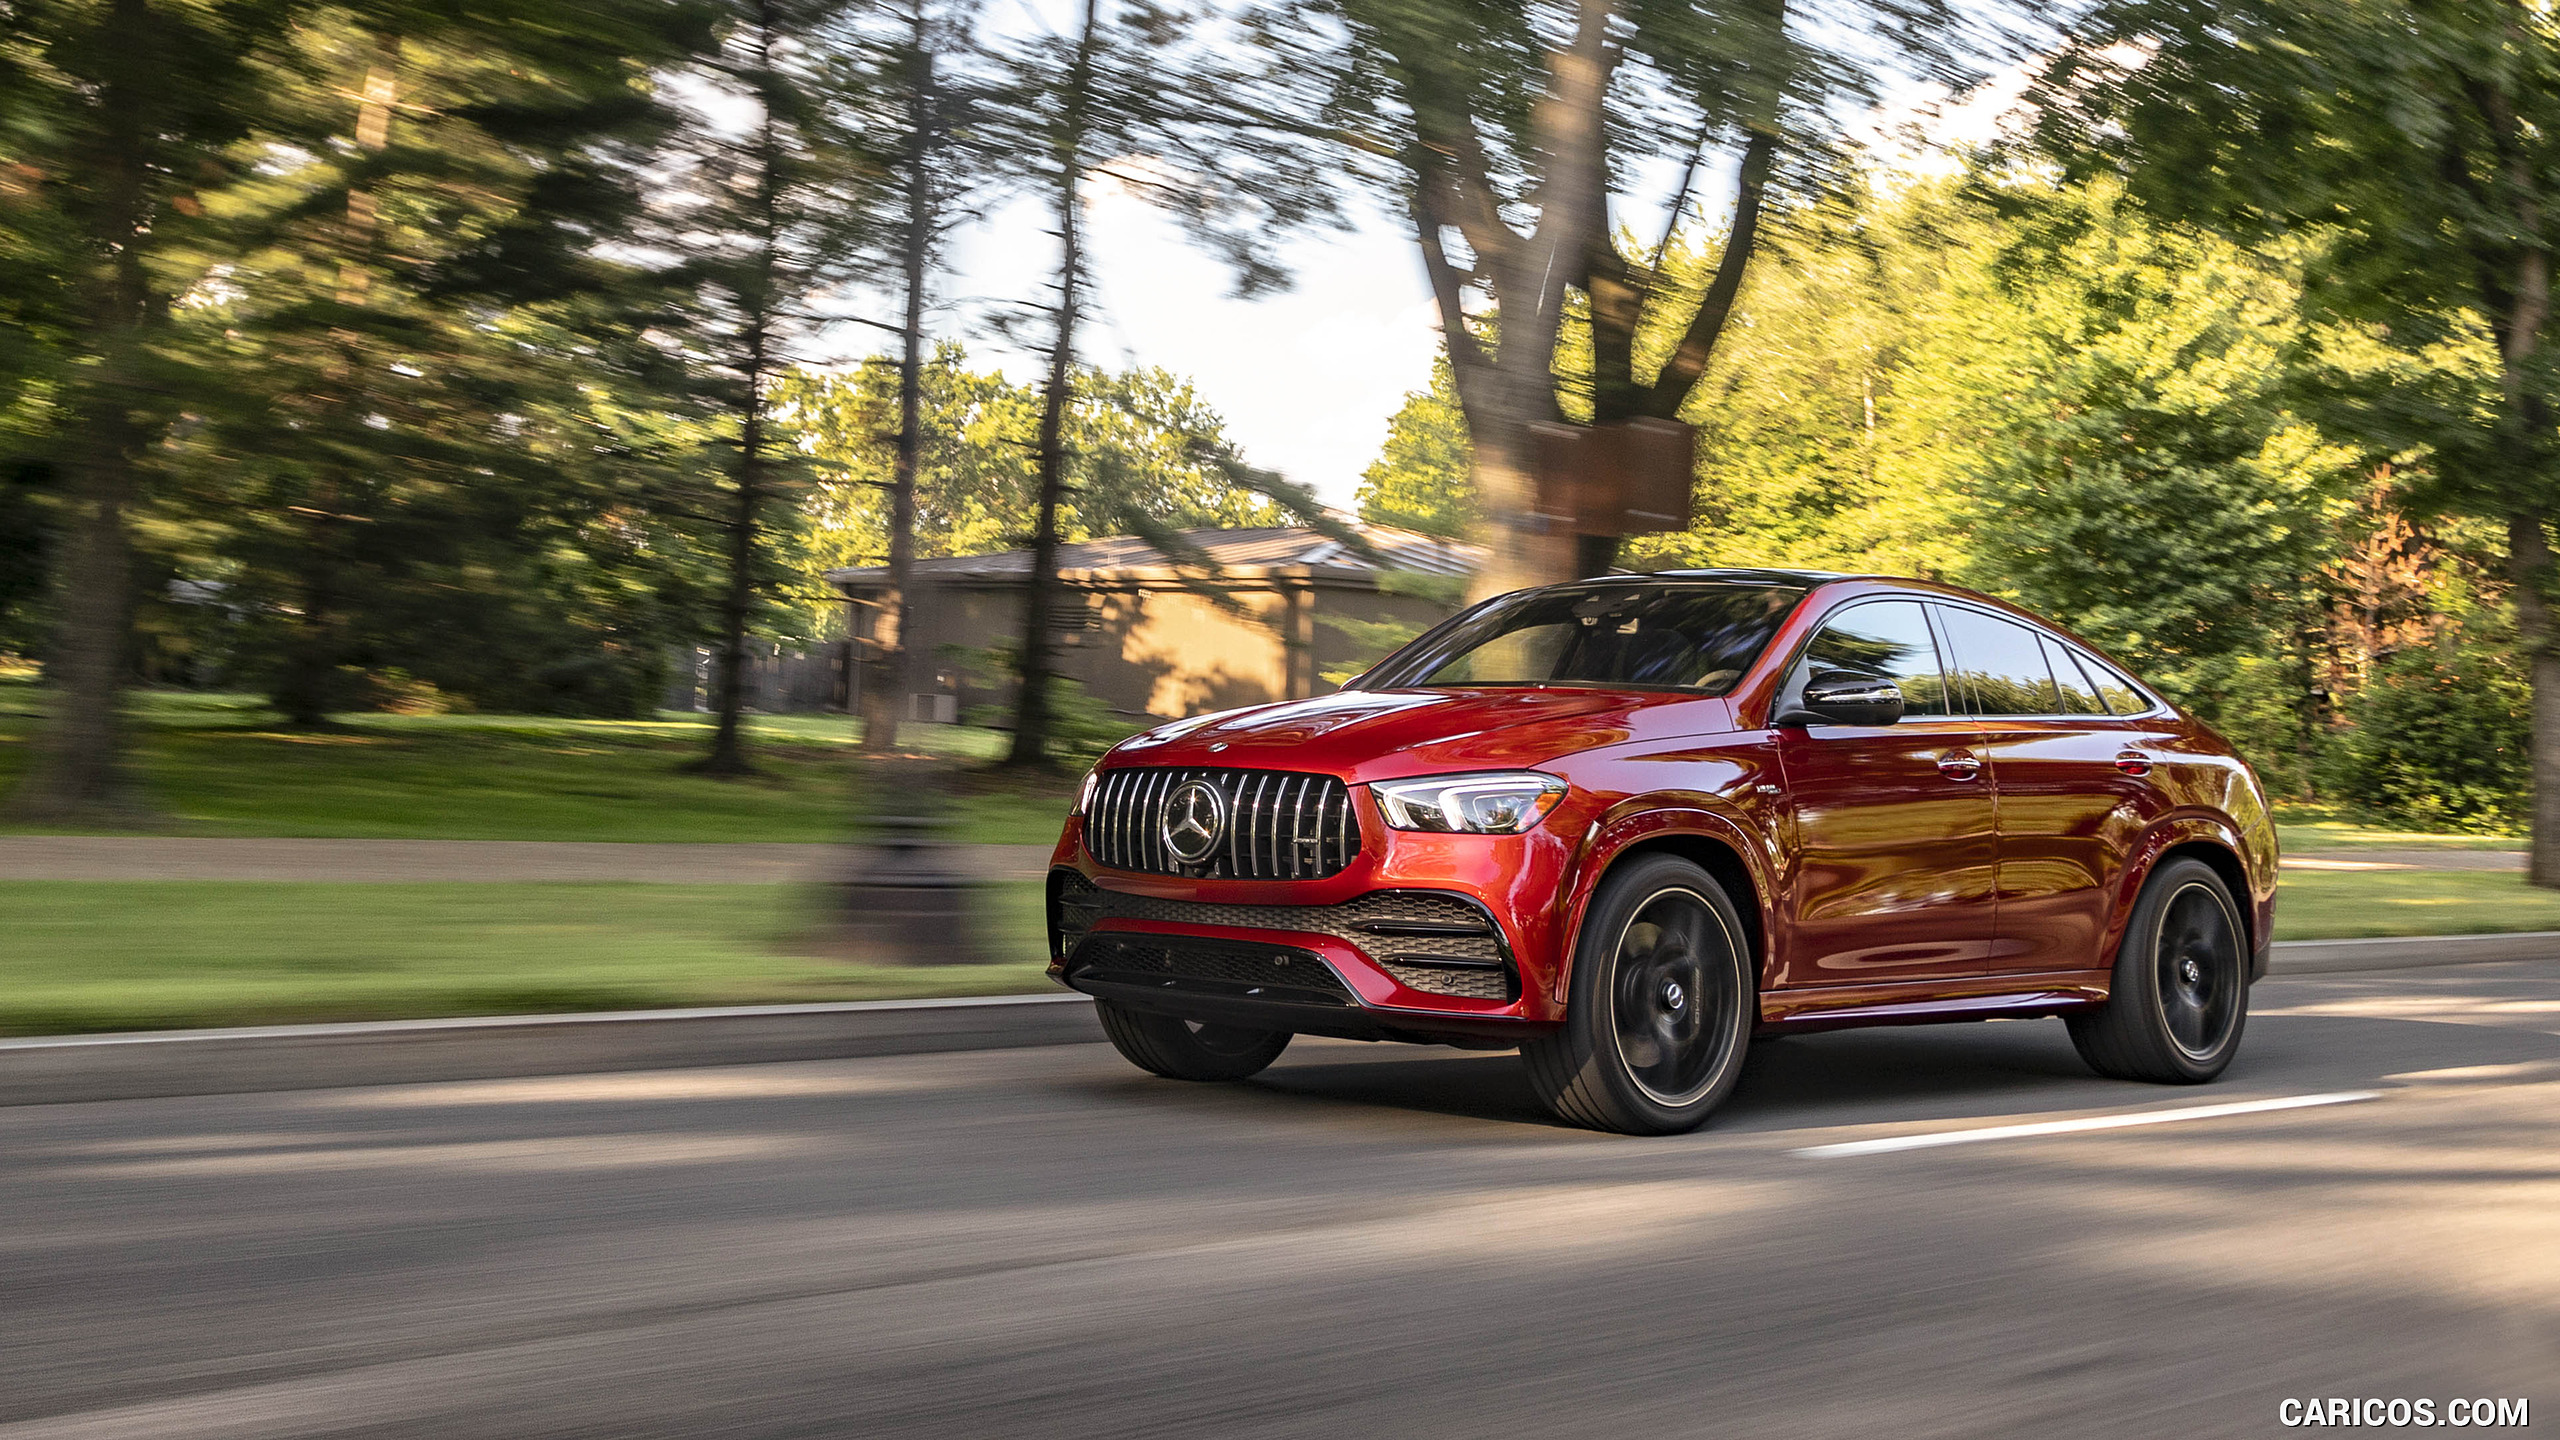 2021 Mercedes-AMG GLE 53 Coupe - Front Three-Quarter, #106 of 178